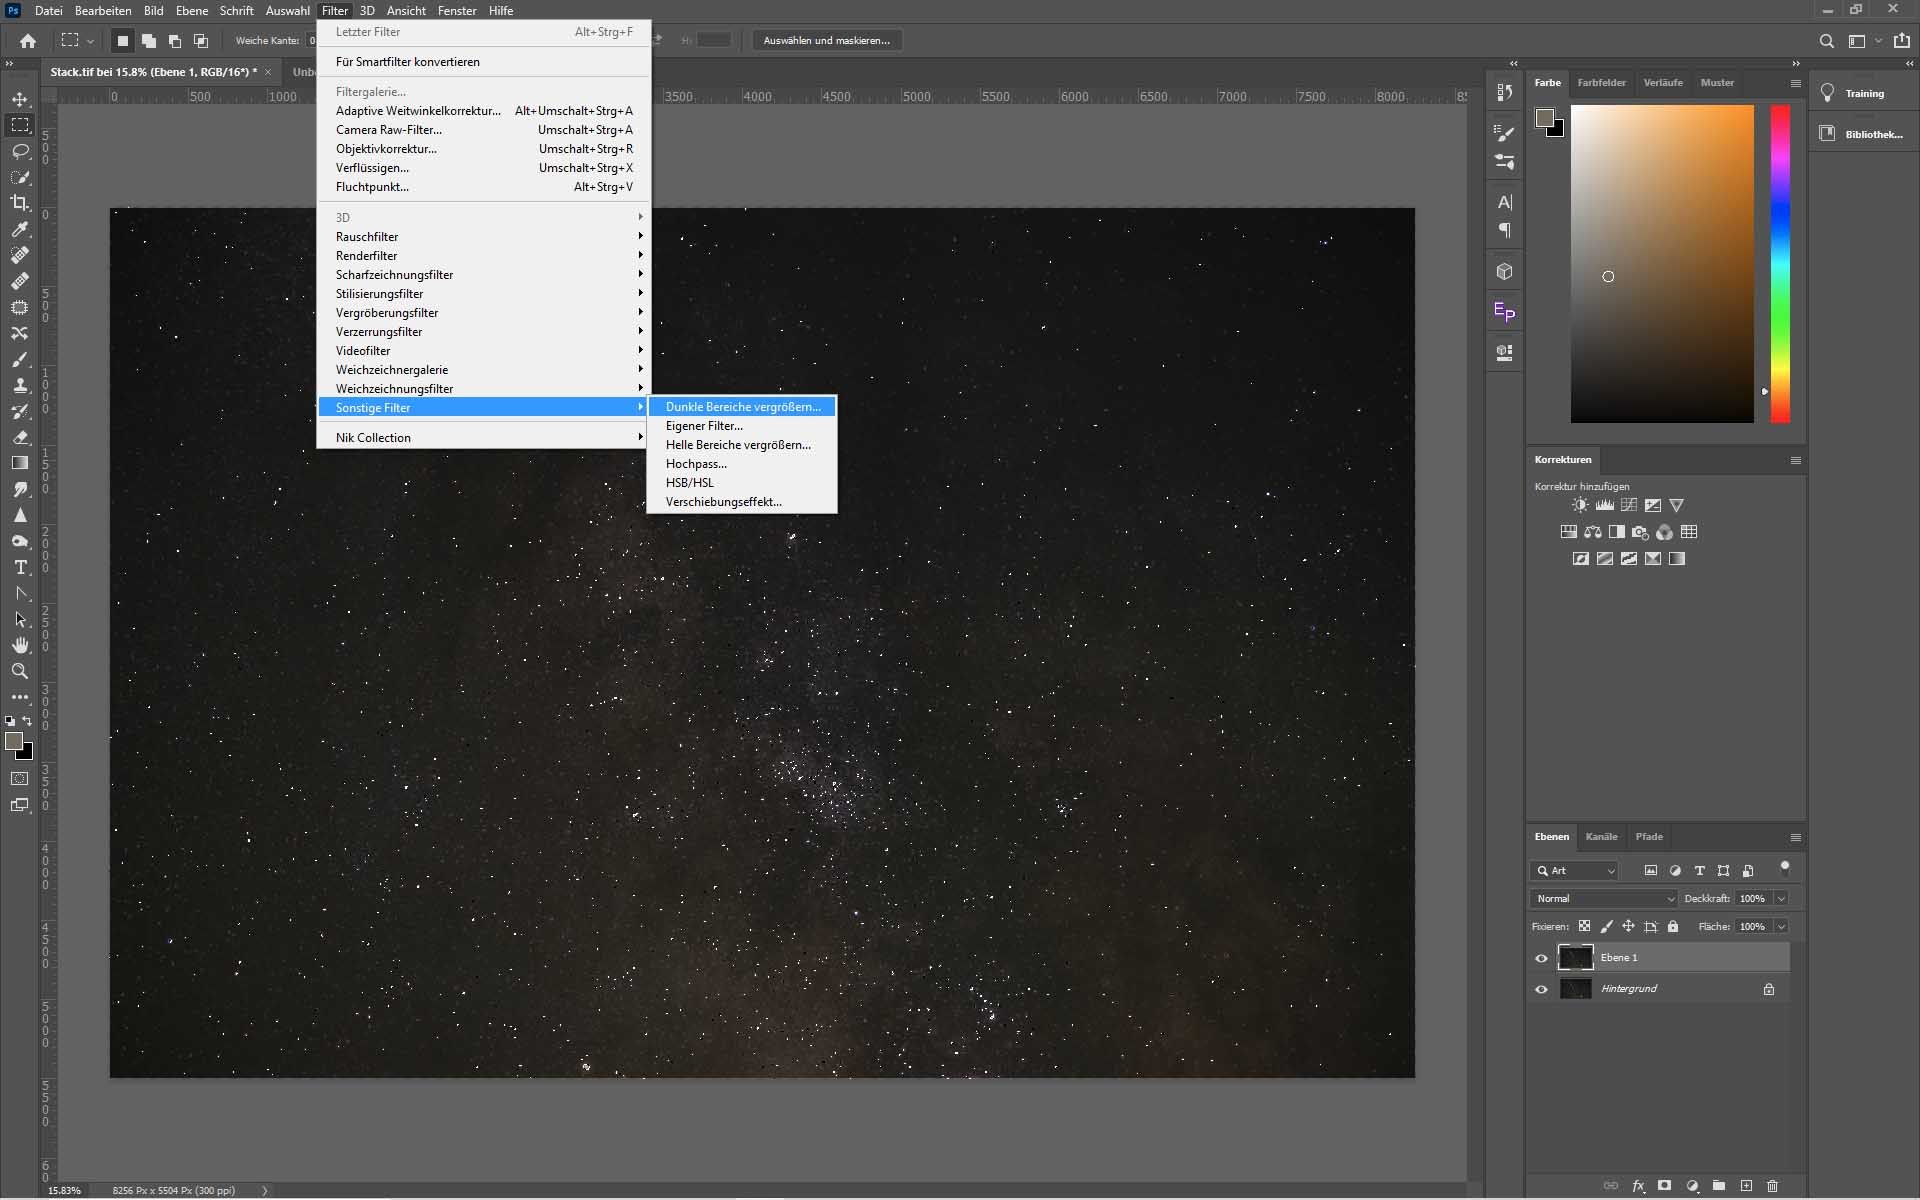 How to edit images of the stars in Photoshop.